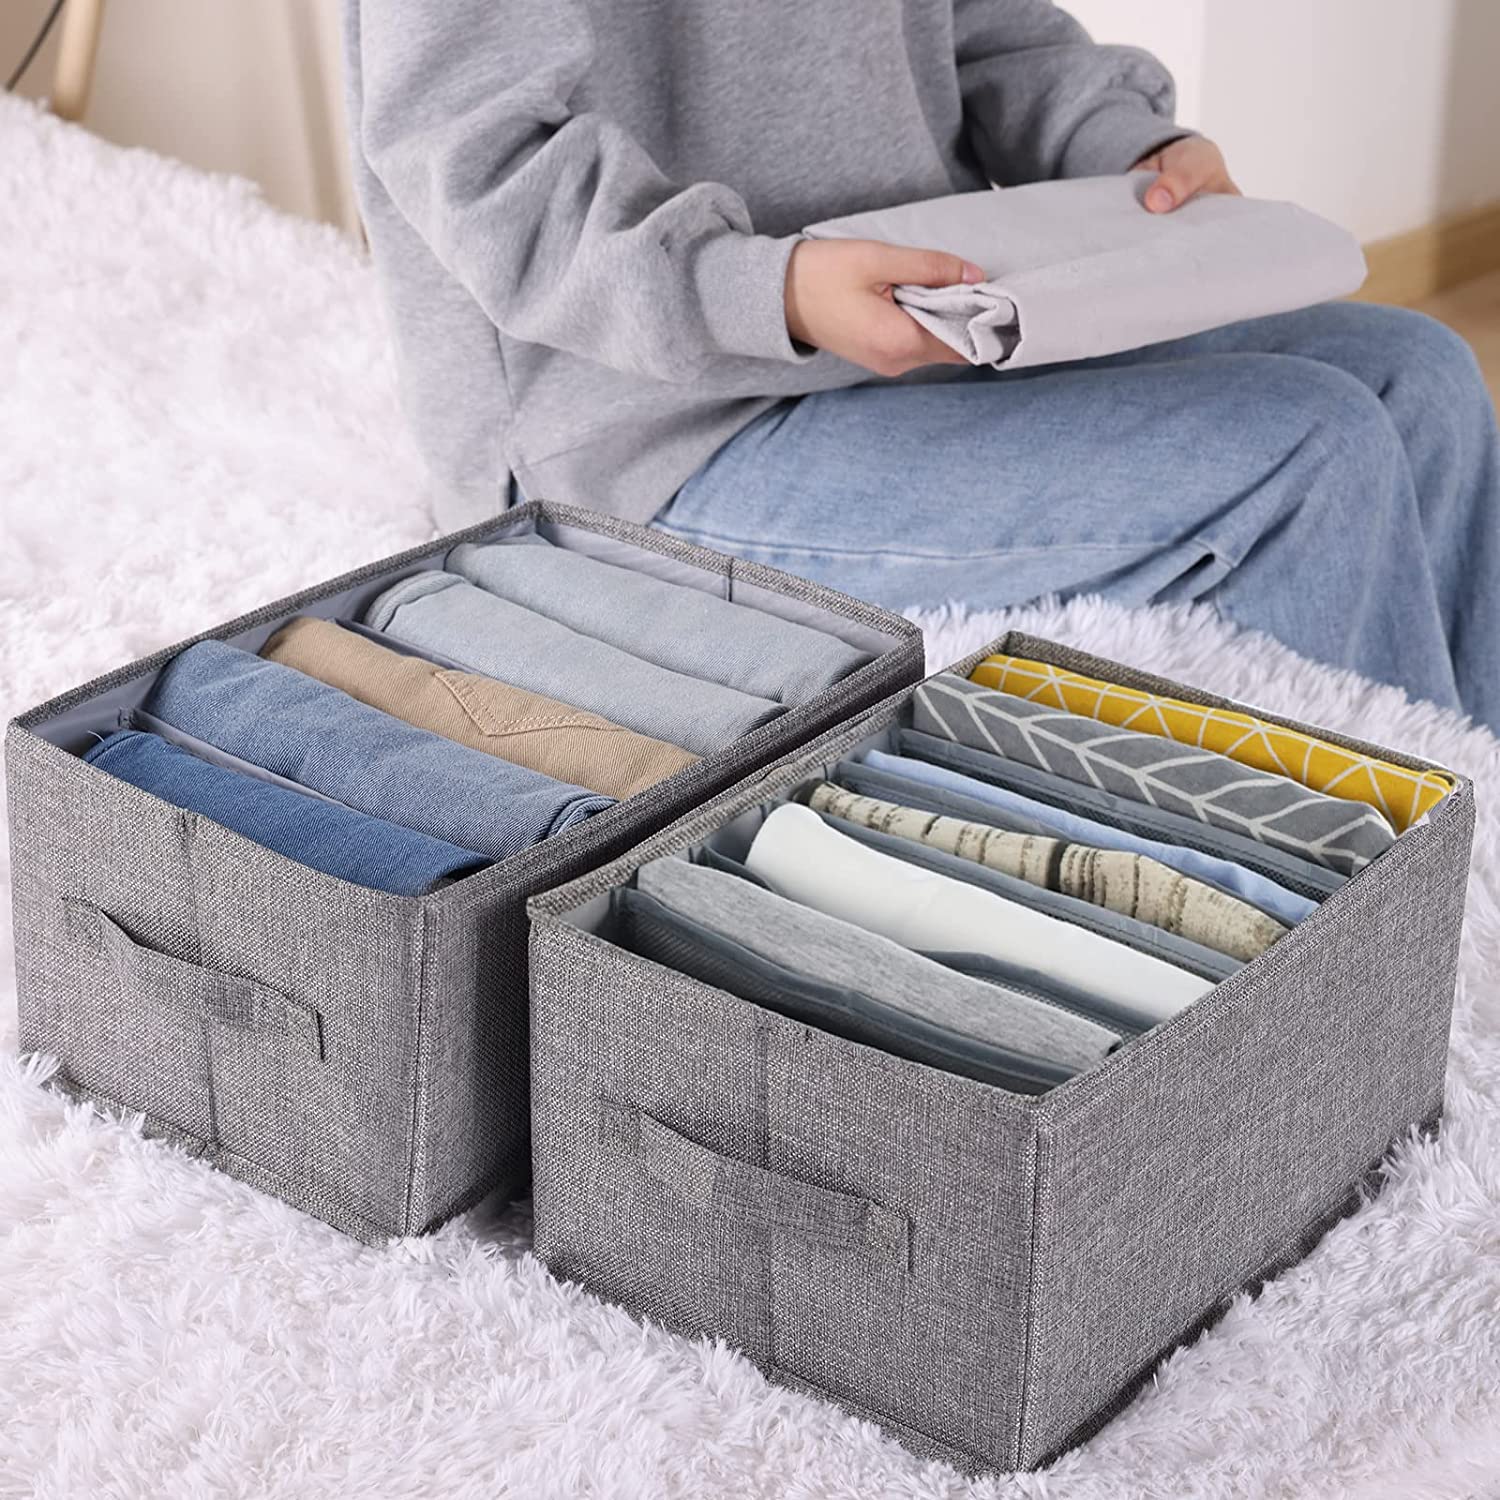 Blushbees 4Pcs Wardrobe Closet Organizers with Support Board, for Shirts, Pants, Sweaters